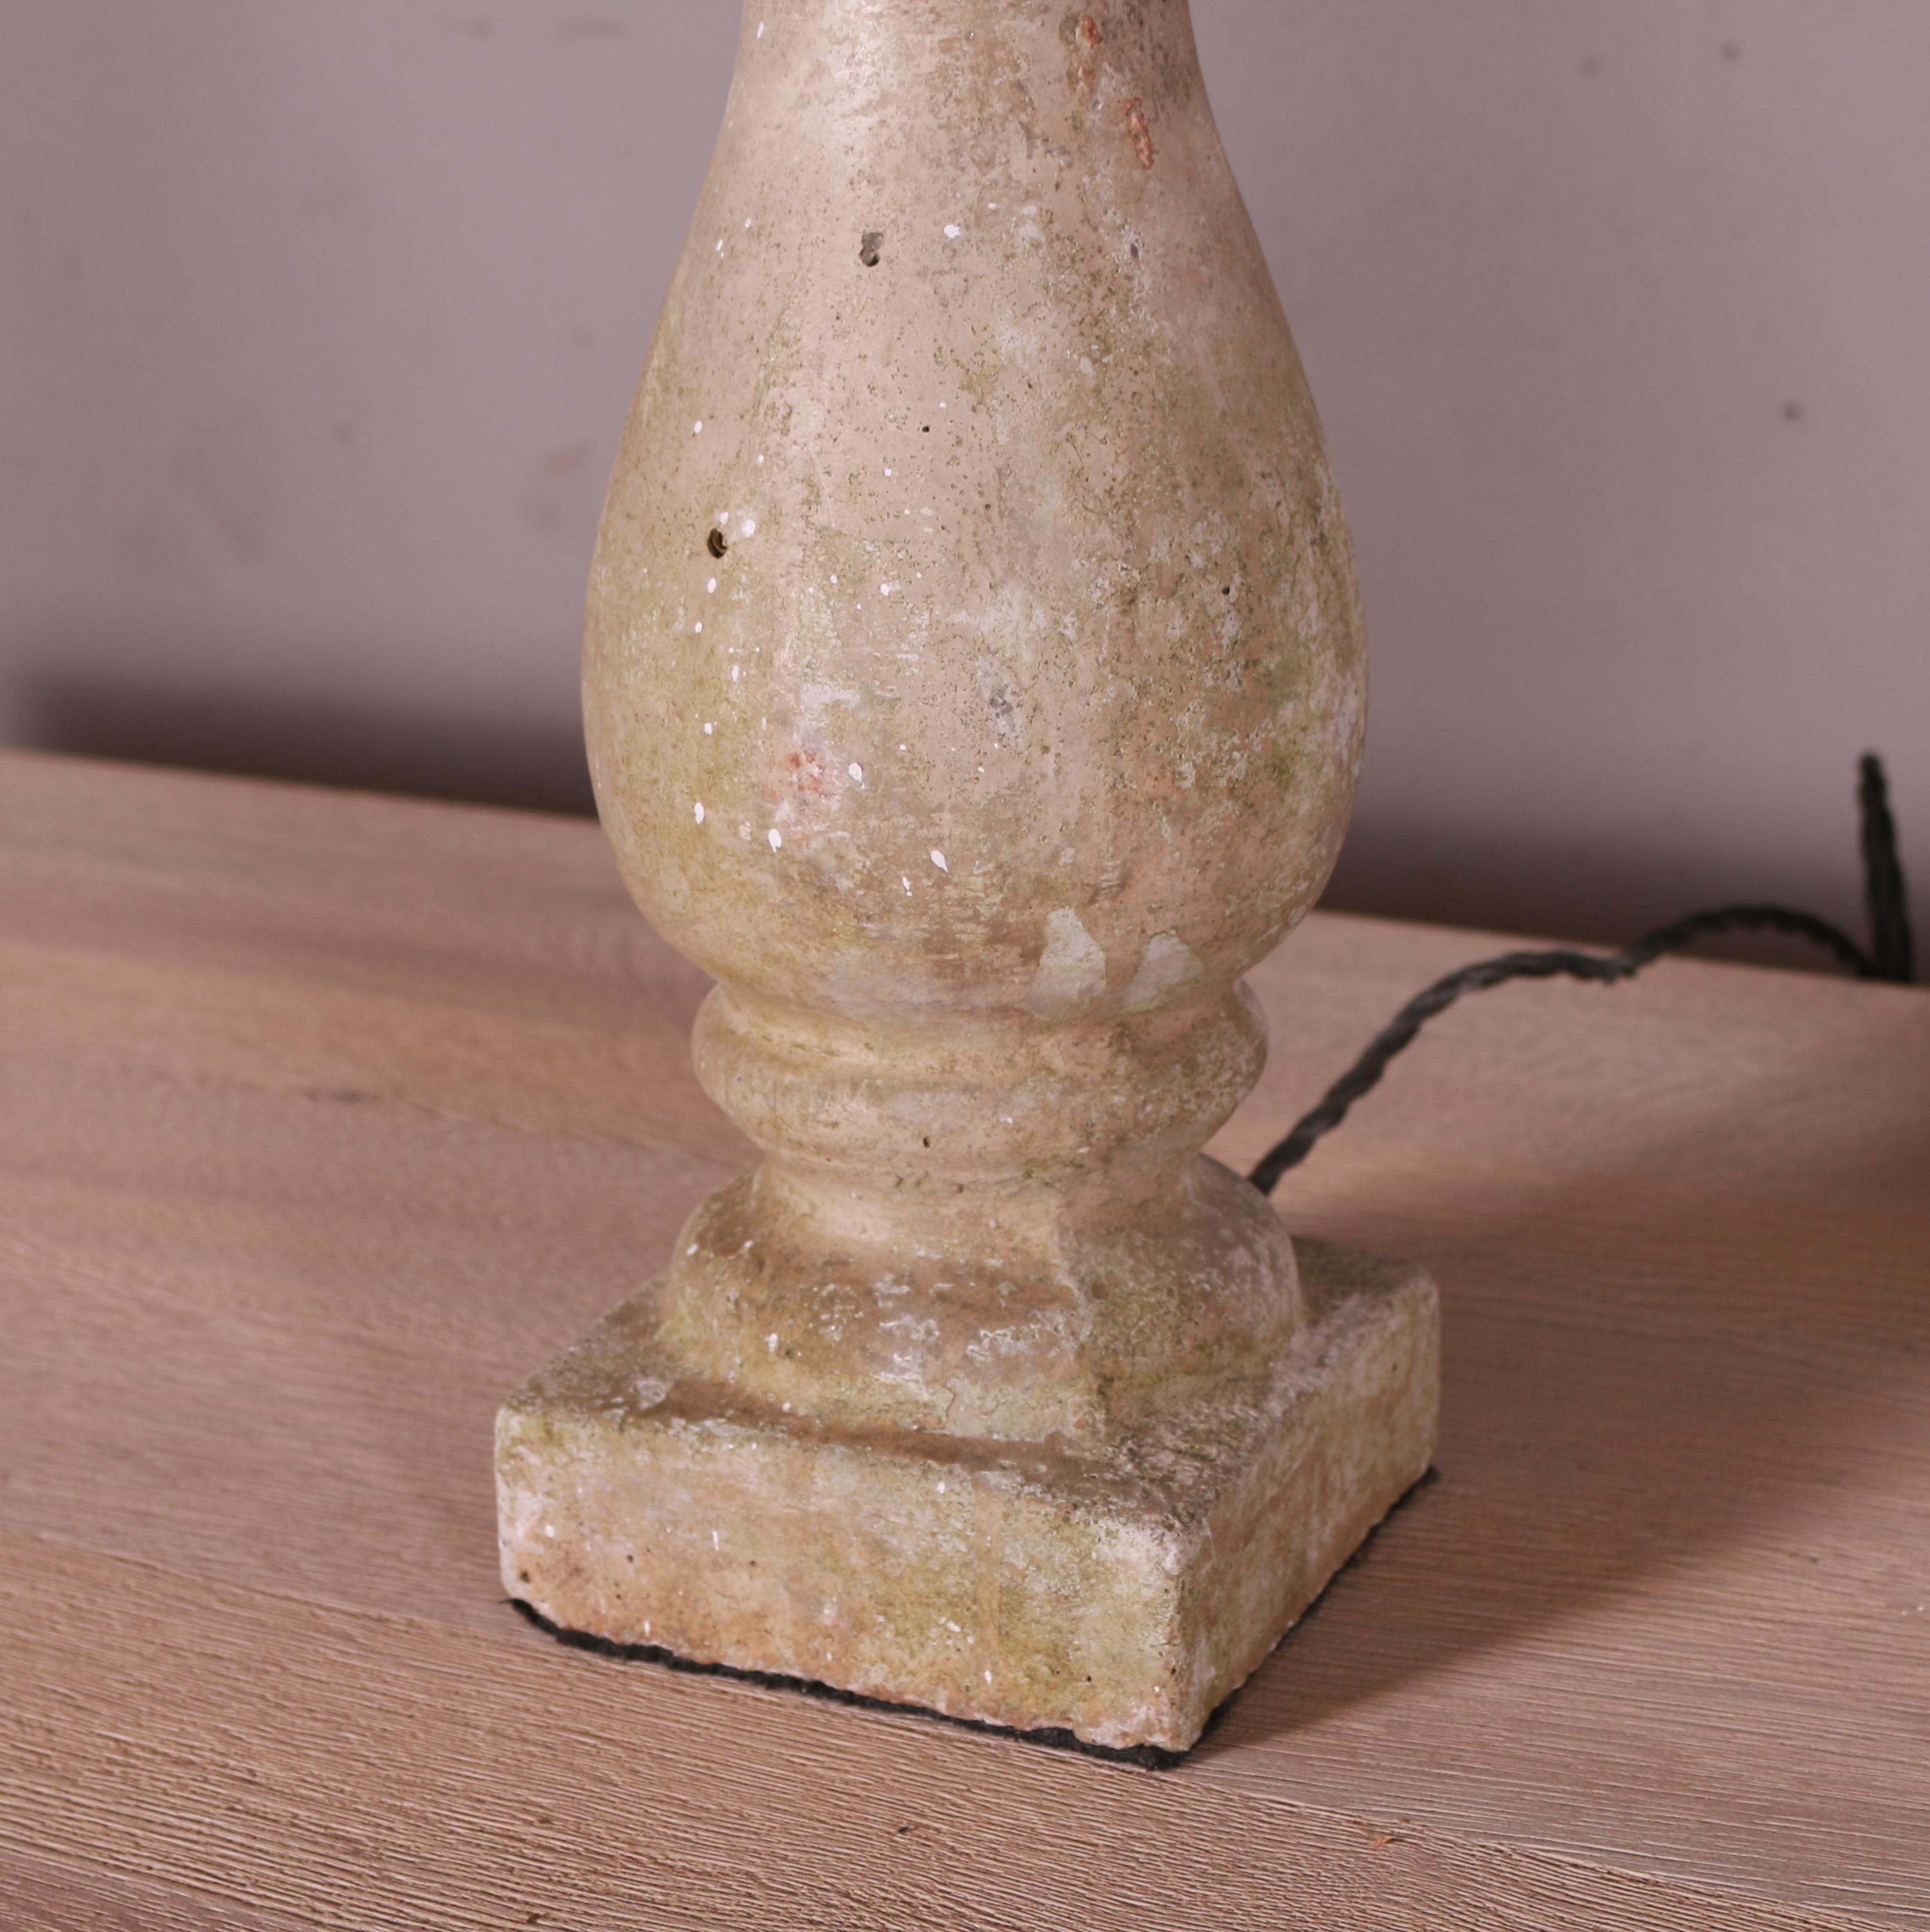 Pair of reconstituted stone balustrade table lamps topped with lead. These lamps have aged brass fittings and a braided cord with a UK plug head.

Height is to the bulb holder.

More are available if needed.

Dimensions
5.5 inches (14 cms)